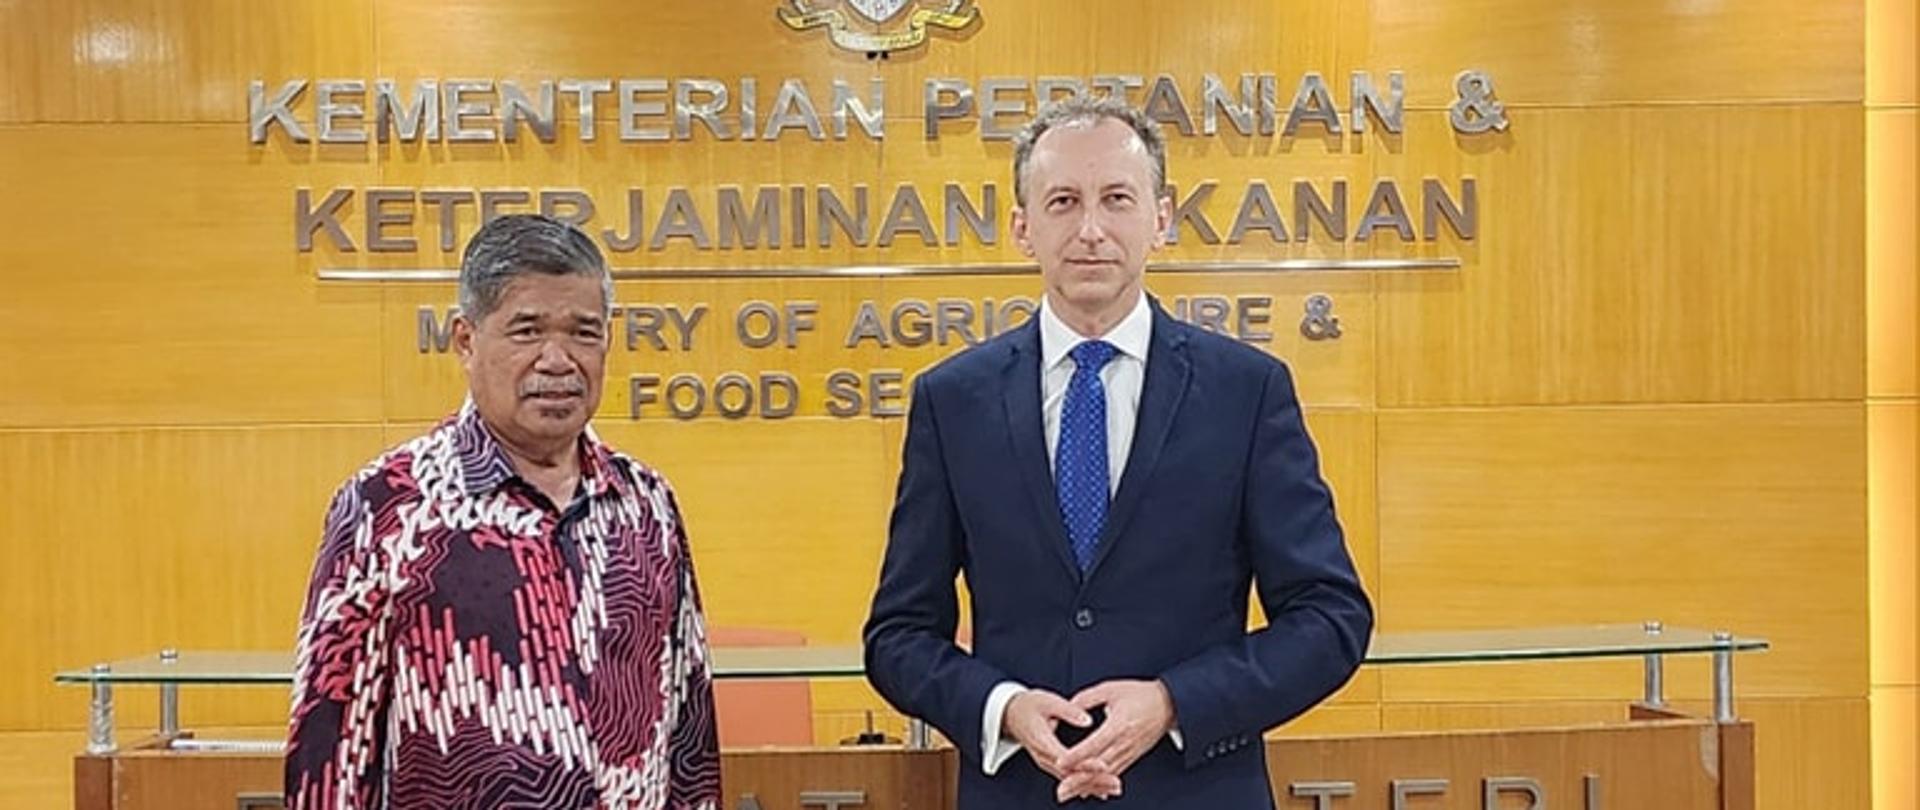 Ambassador’s courtesy visit to the Minister of Agriculture and Food Security of Malaysia